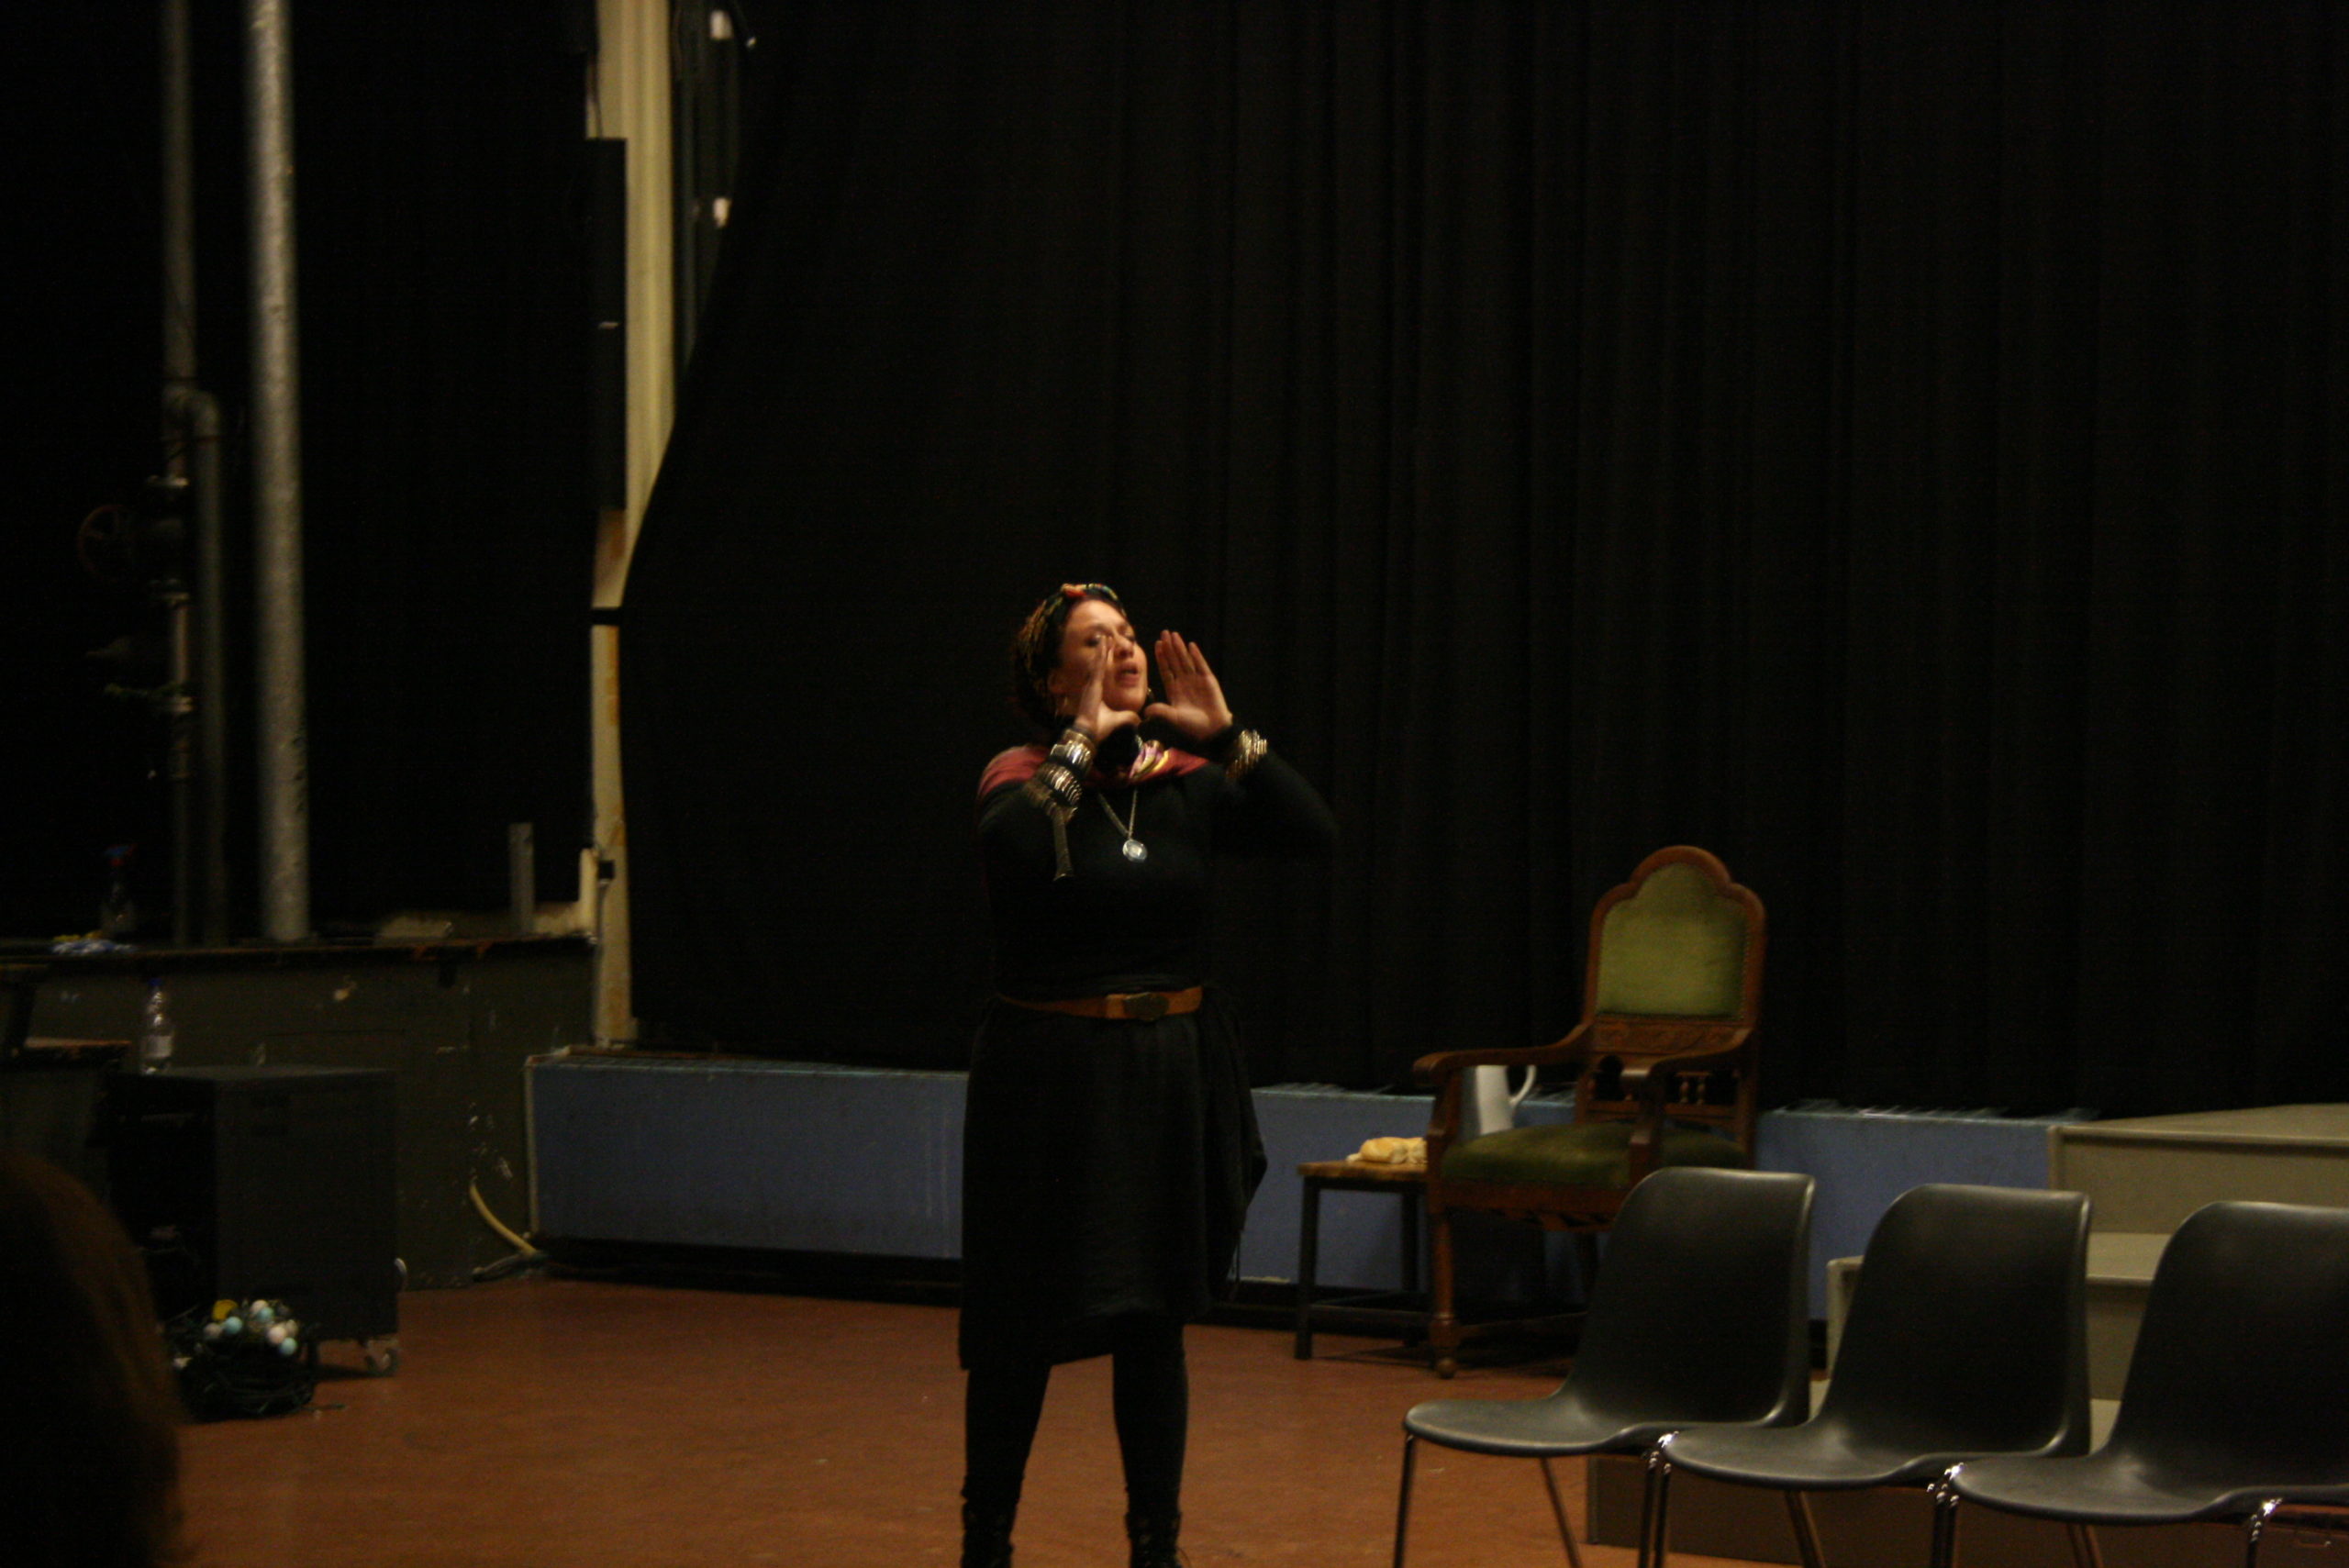 Photo from the show "Skin of our Teeth". A female actor on stage, dressed mostly in black, has her hands in front of her mouth like she's calling someone